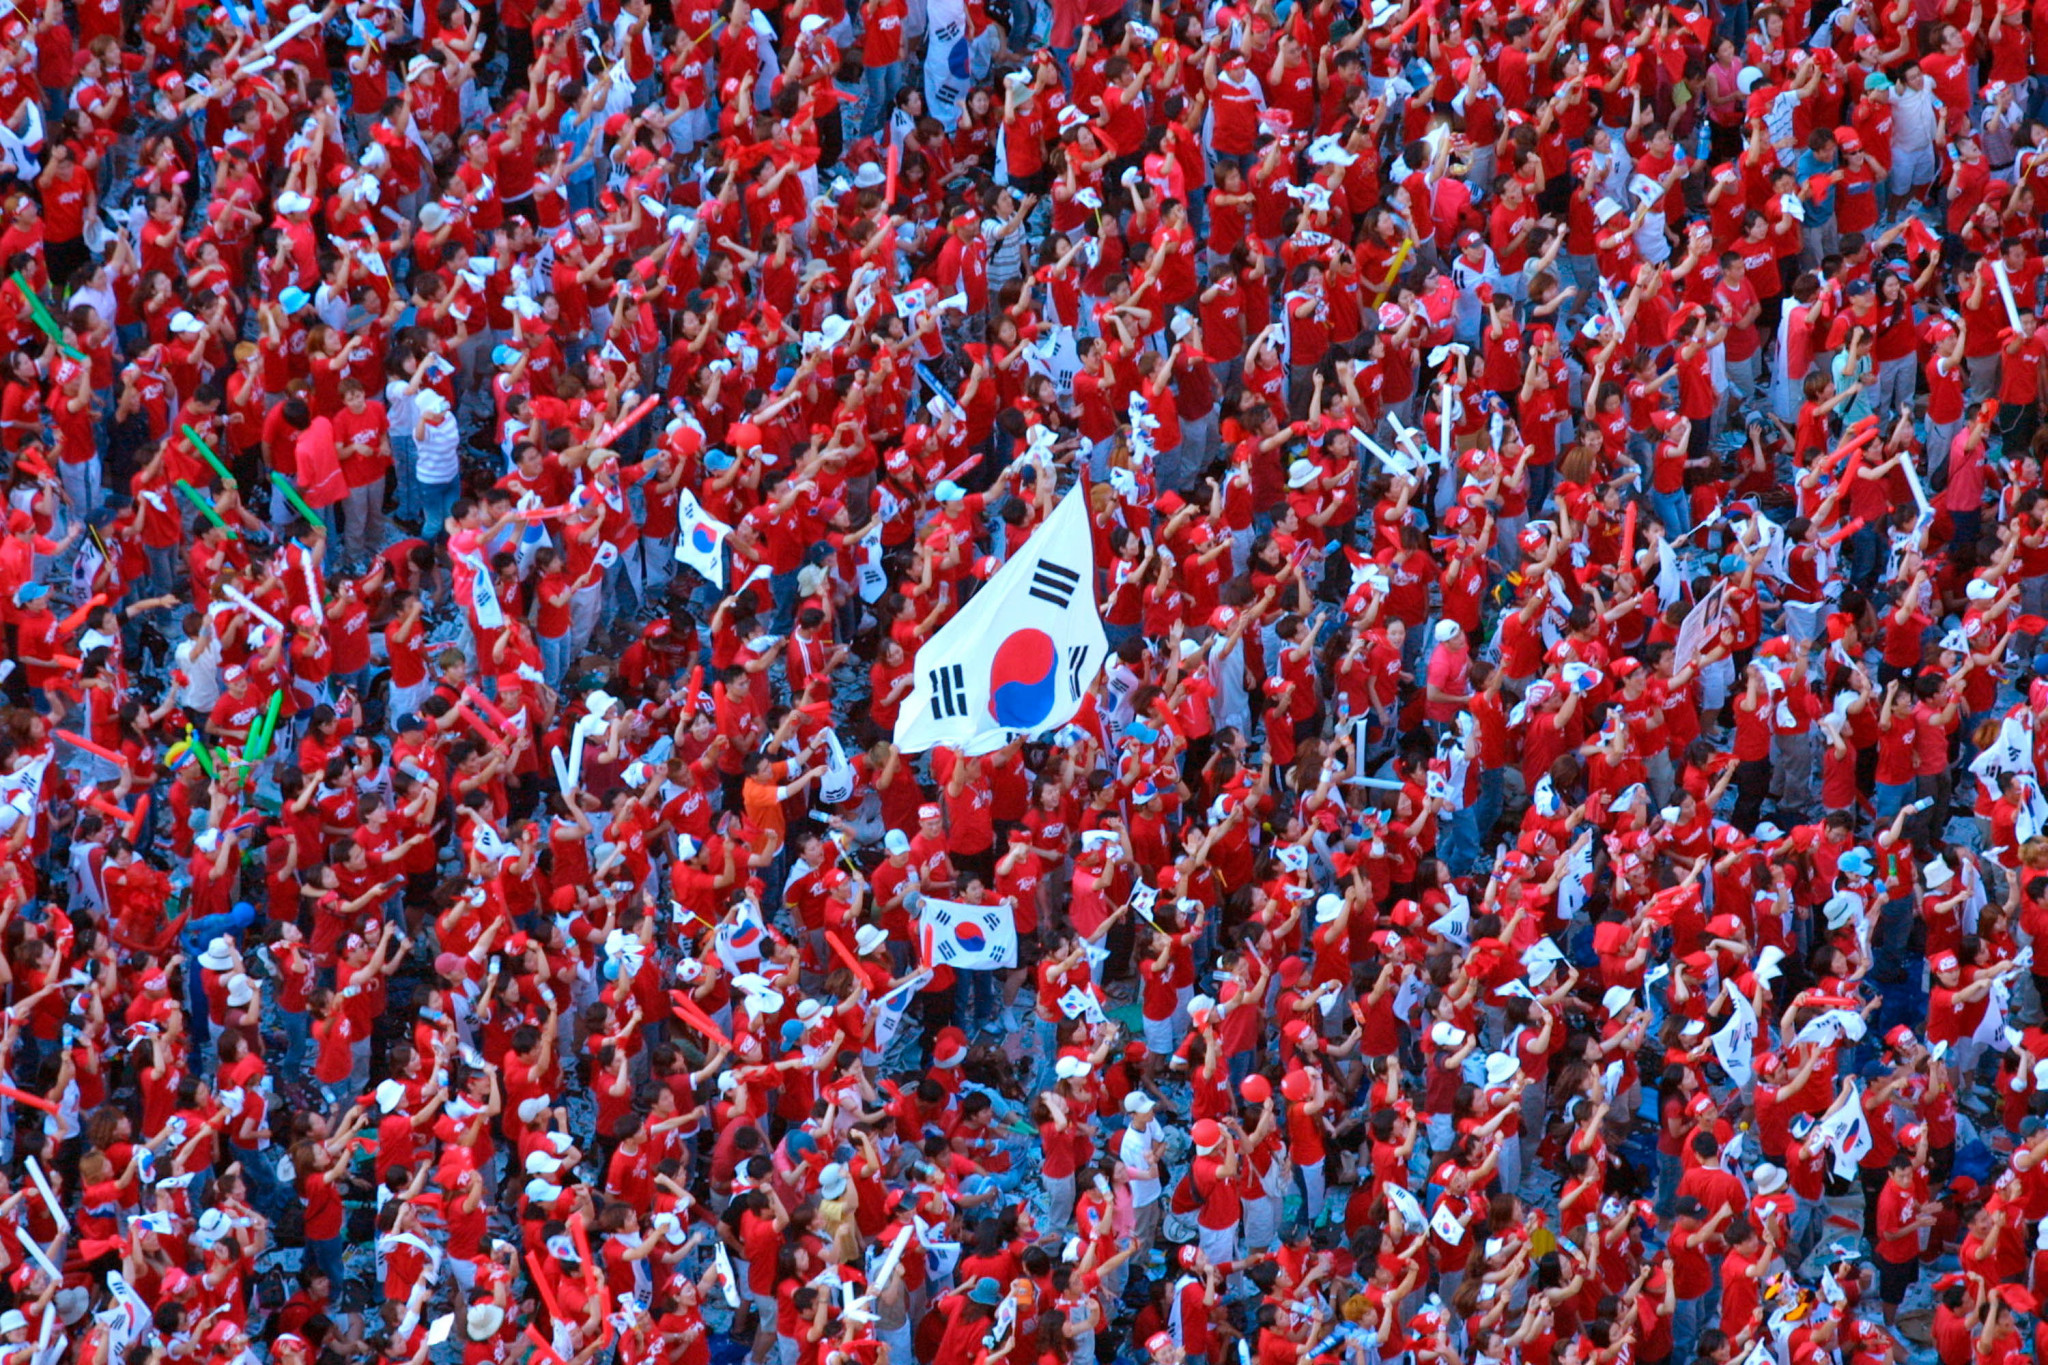 The Korea Football Association is set to cancel plans for fan gatherings in the streets during the upcoming FIFA World Cup ©Getty Images